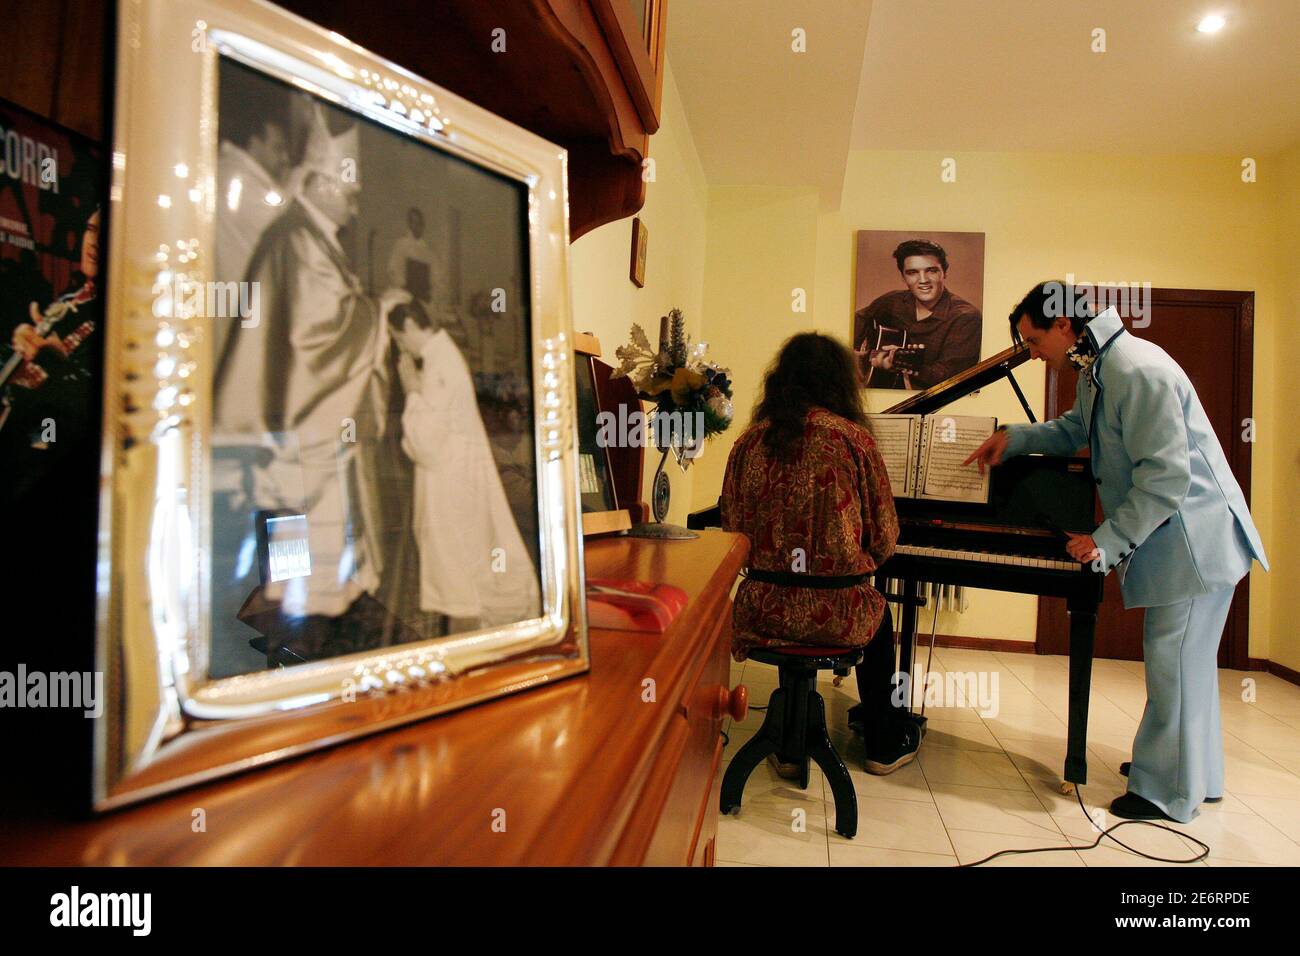 Father Antoniu Petrescu (R) and musician Fabrizio Fiale practice Elvis Presley songs at his home in the central Italian city of Avezzano October 14, 2007. Father Petrescu, a Romanian who became a Roman Catholic priest three years ago, is also an Elvis Presley impersonator. Picture taken October 14, 2007.   To match feature ITALY-ELVIS/      REUTERS/Dario Pignatelli   (ITALY) Stock Photo